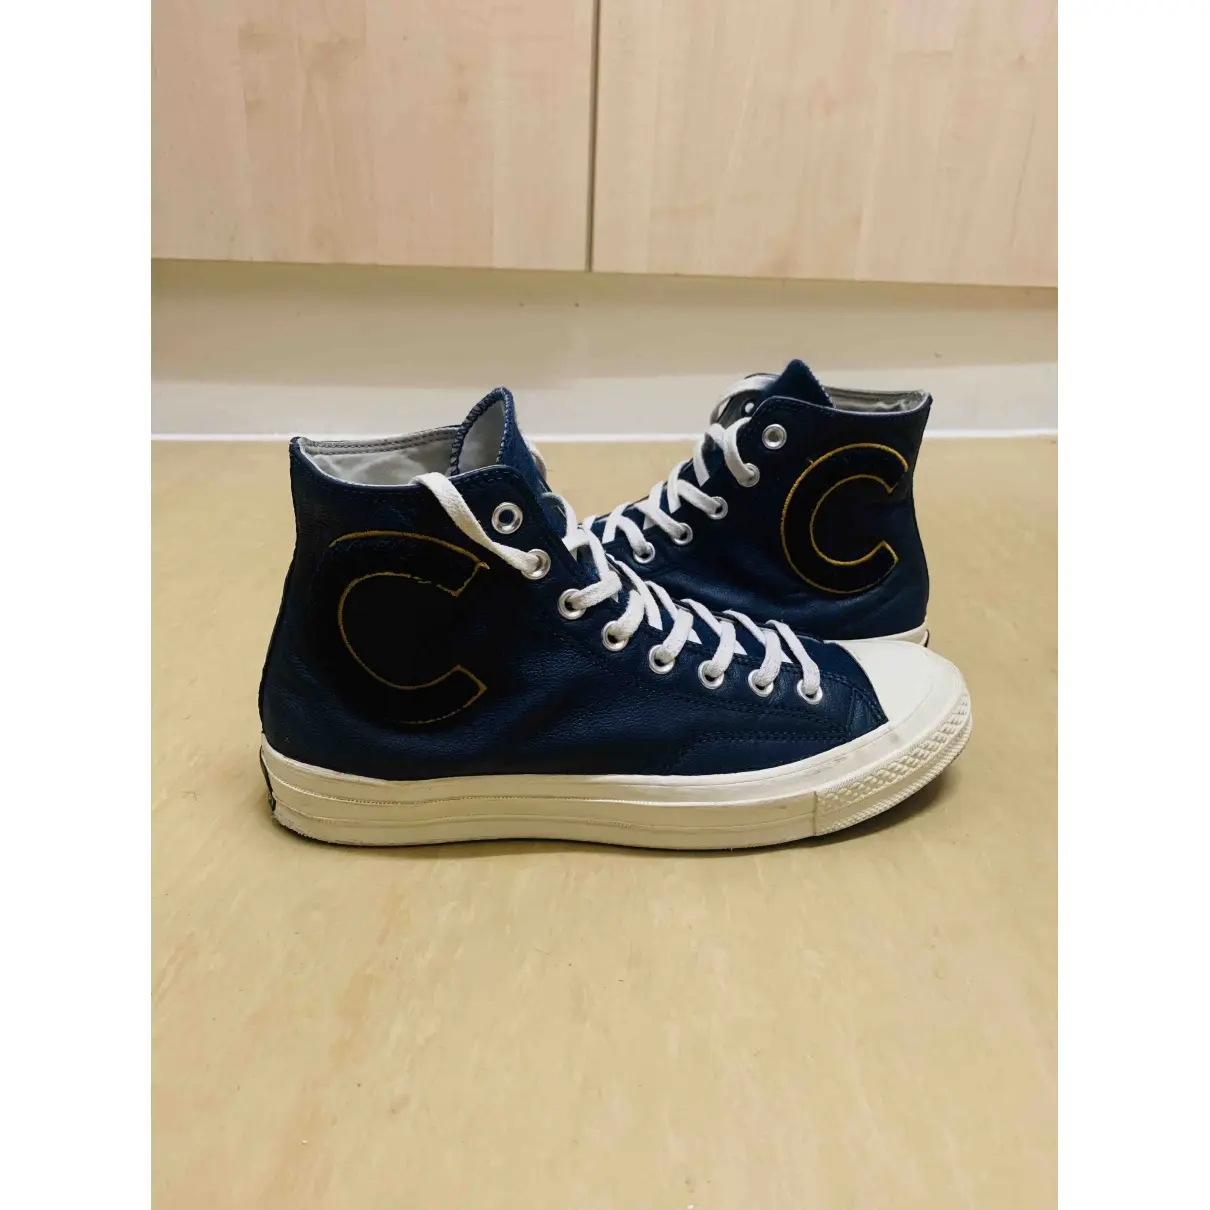 Converse Leather high trainers for sale